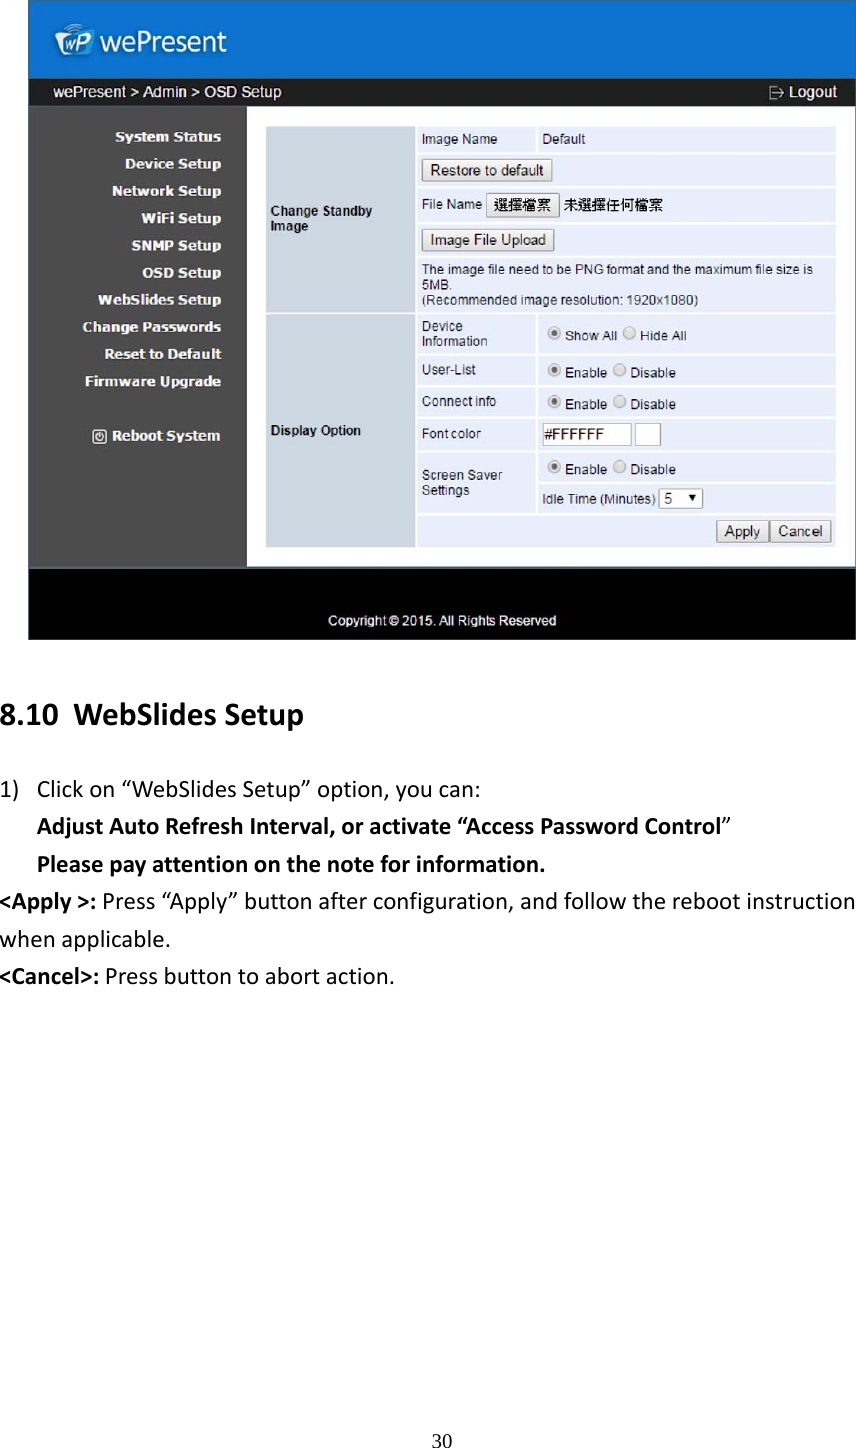   308.10 WebSlidesSetup1) Clickon“WebSlidesSetup”option,youcan:AdjustAutoRefreshInterval,oractivate“AccessPasswordControl”Pleasepayattentiononthenoteforinformation.&lt;Apply&gt;:Press“Apply”buttonafterconfiguration,andfollowtherebootinstructionwhenapplicable.&lt;Cancel&gt;:Pressbuttontoabortaction.